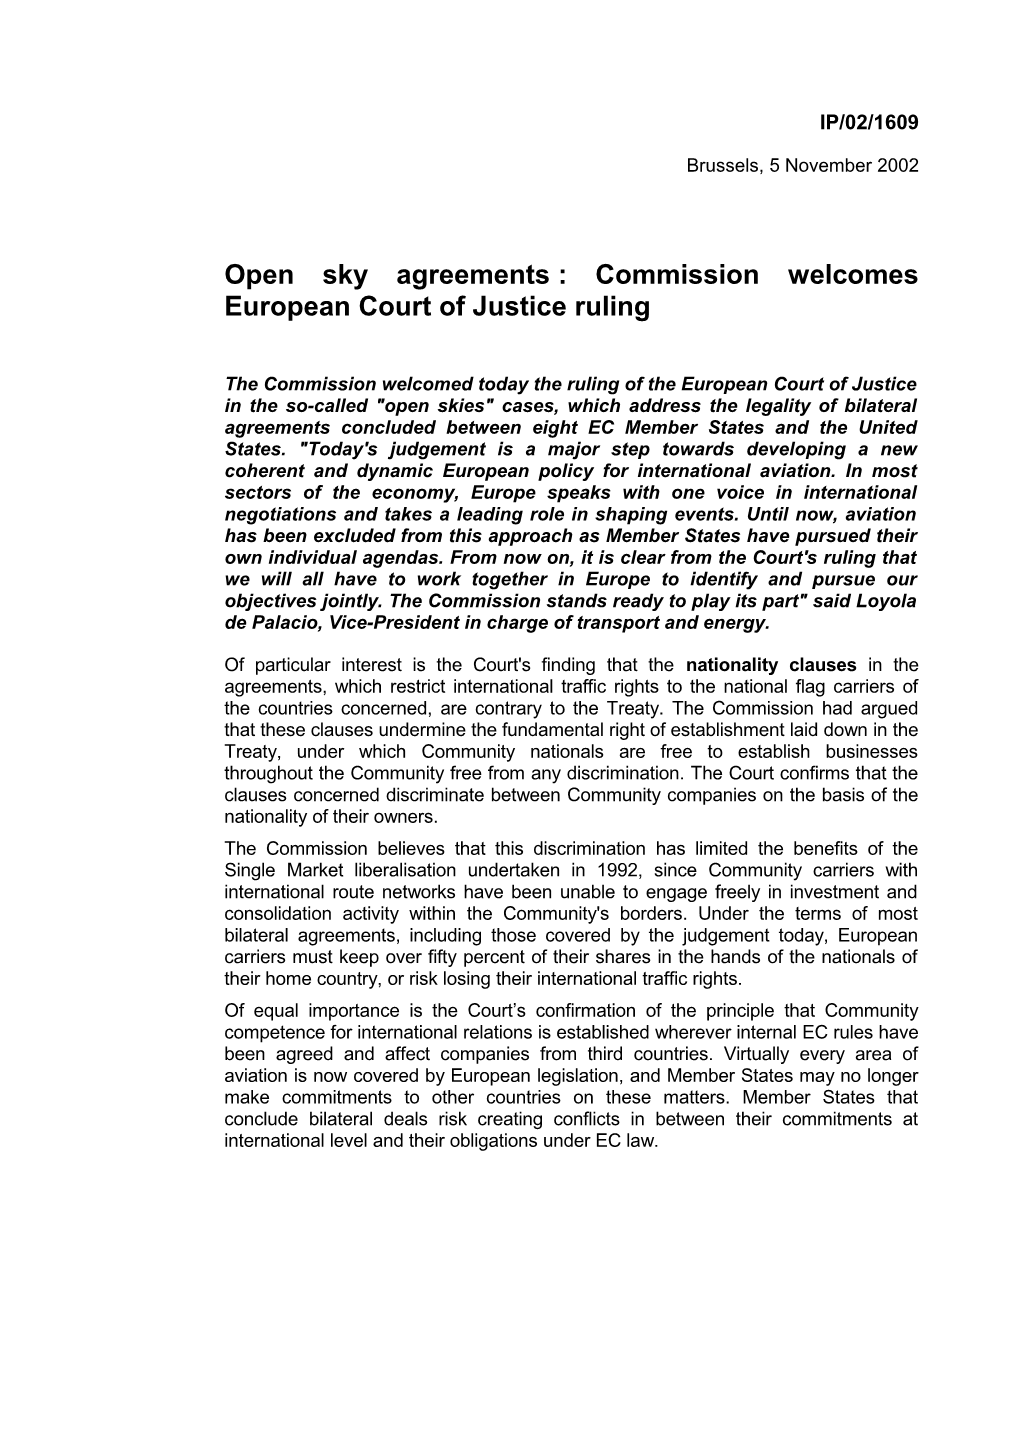 Open Sky Agreements: Commission Welcomes European Court of Justice Ruling